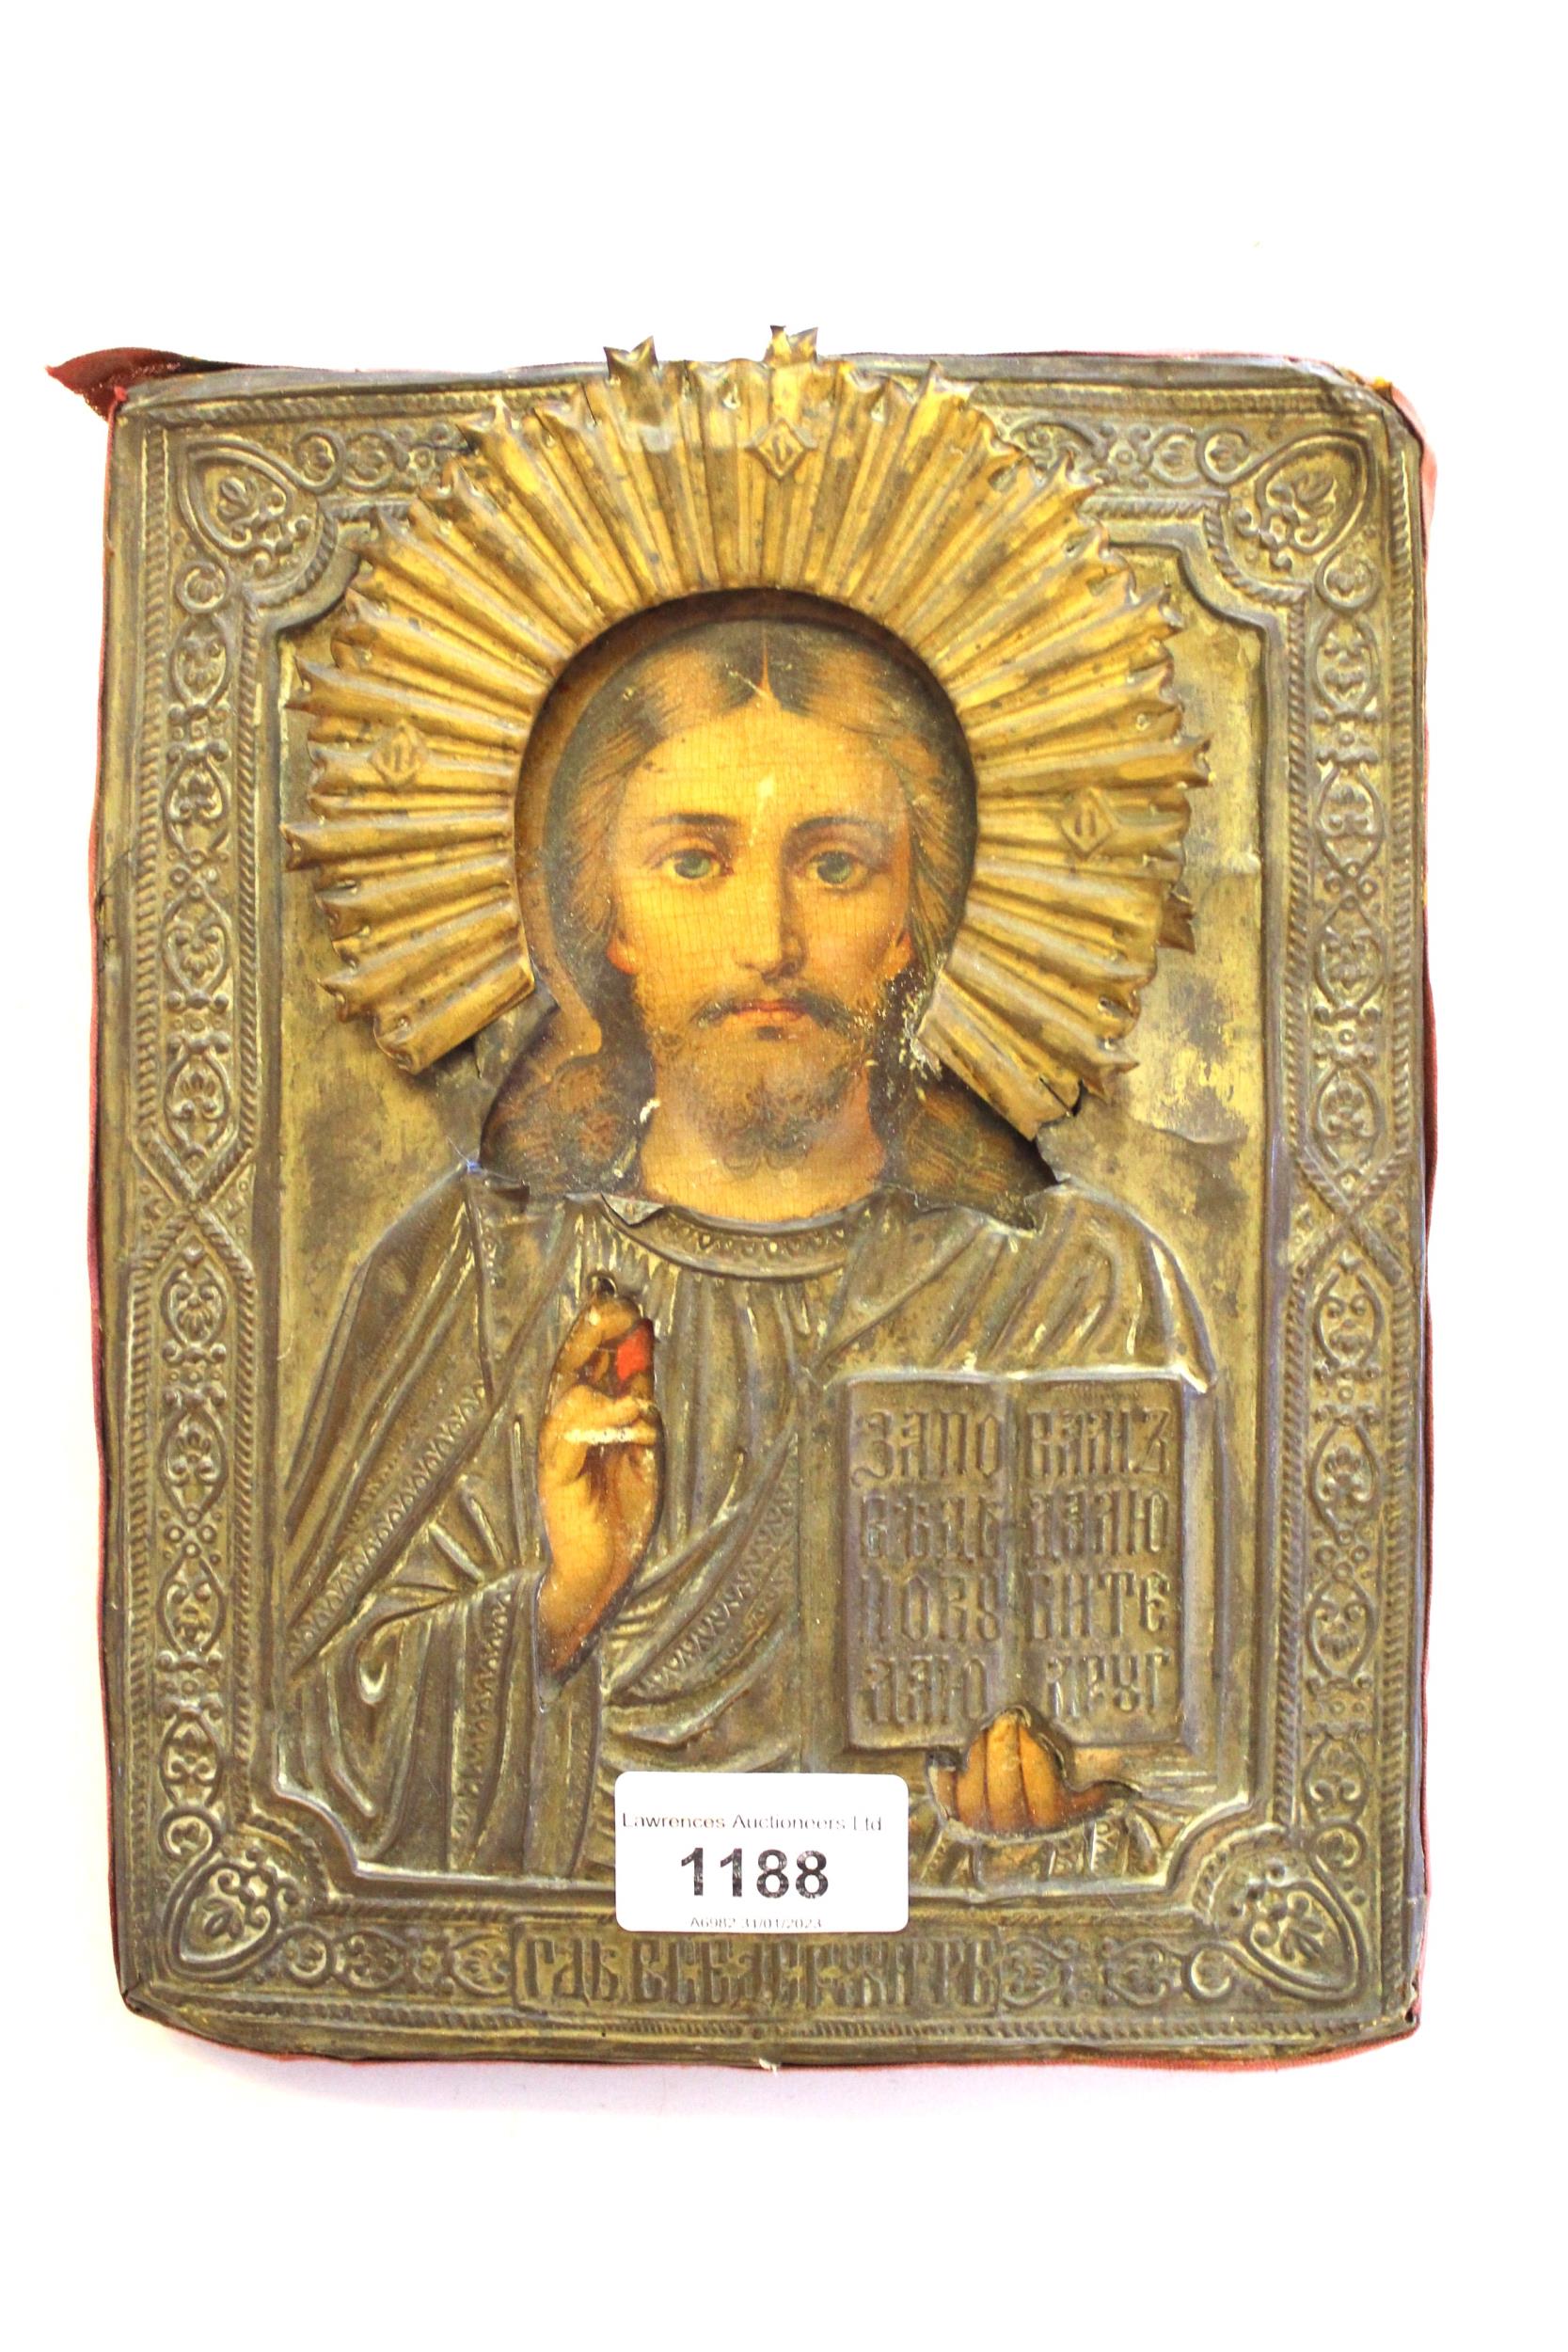 Late 19th / early 20th Century printed and embossed brass mounted icon portrait of Christ, 22.5 x